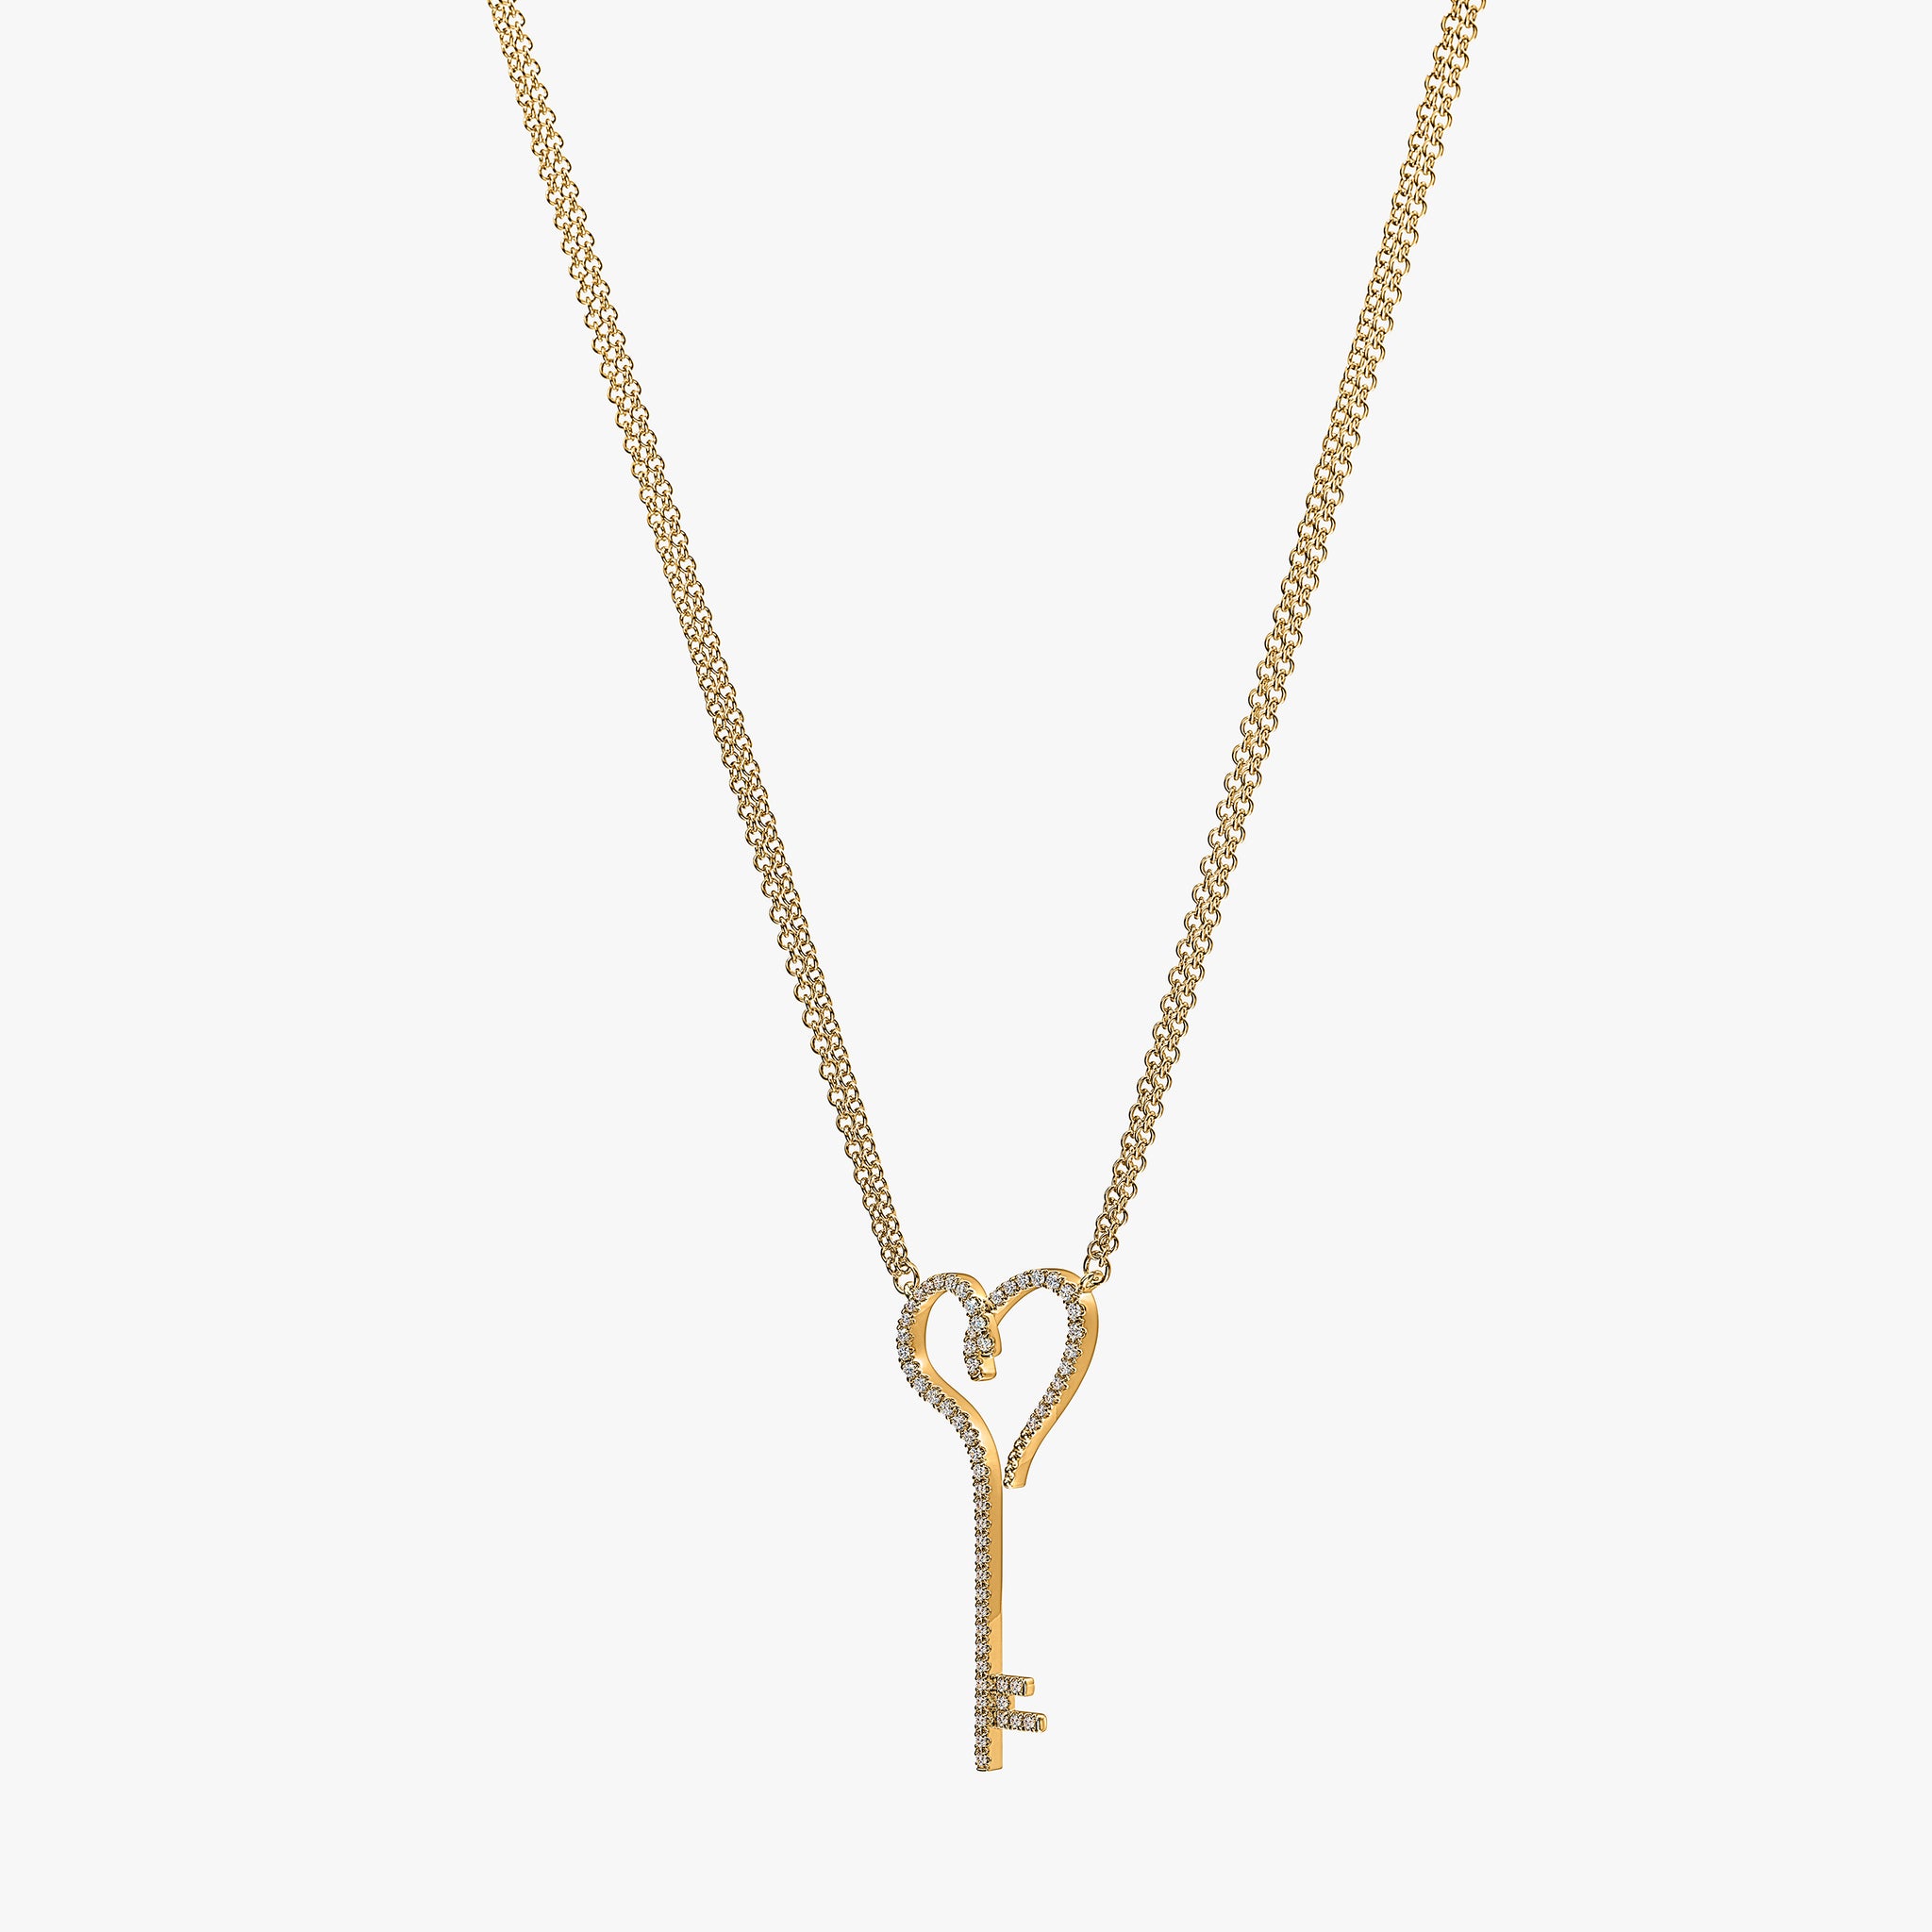 J'EVAR 14KT Yellow Gold Heart Key ALTR Lab Grown Diamond Necklace Perspective View